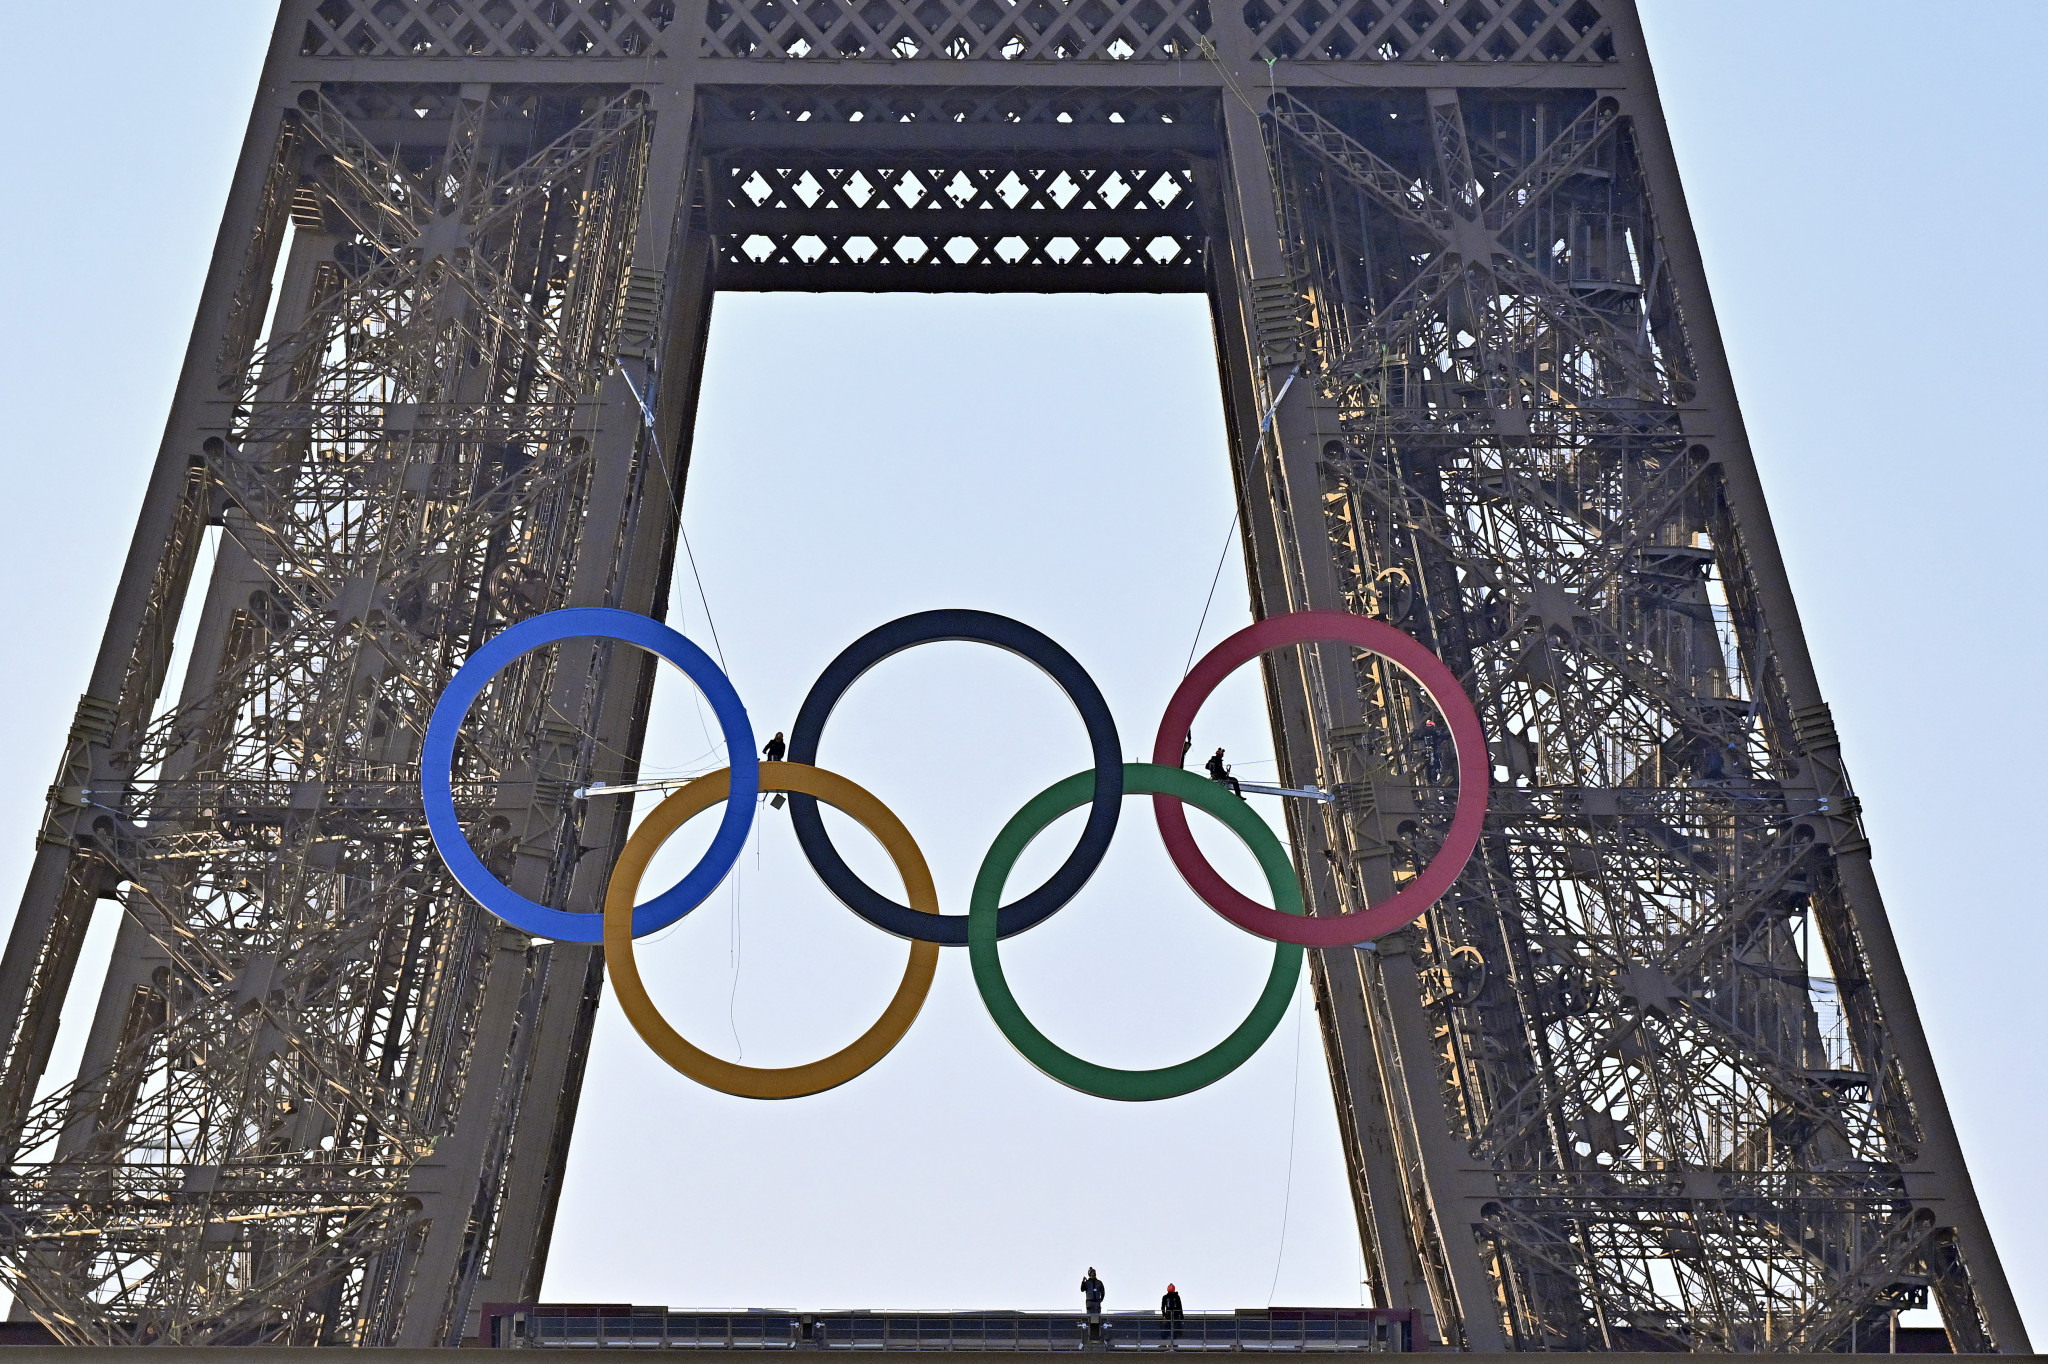 A silver medal originally credited to Great Britain in the 1900 Paris Olympics has been reassigned to France. GETTY IMAGES